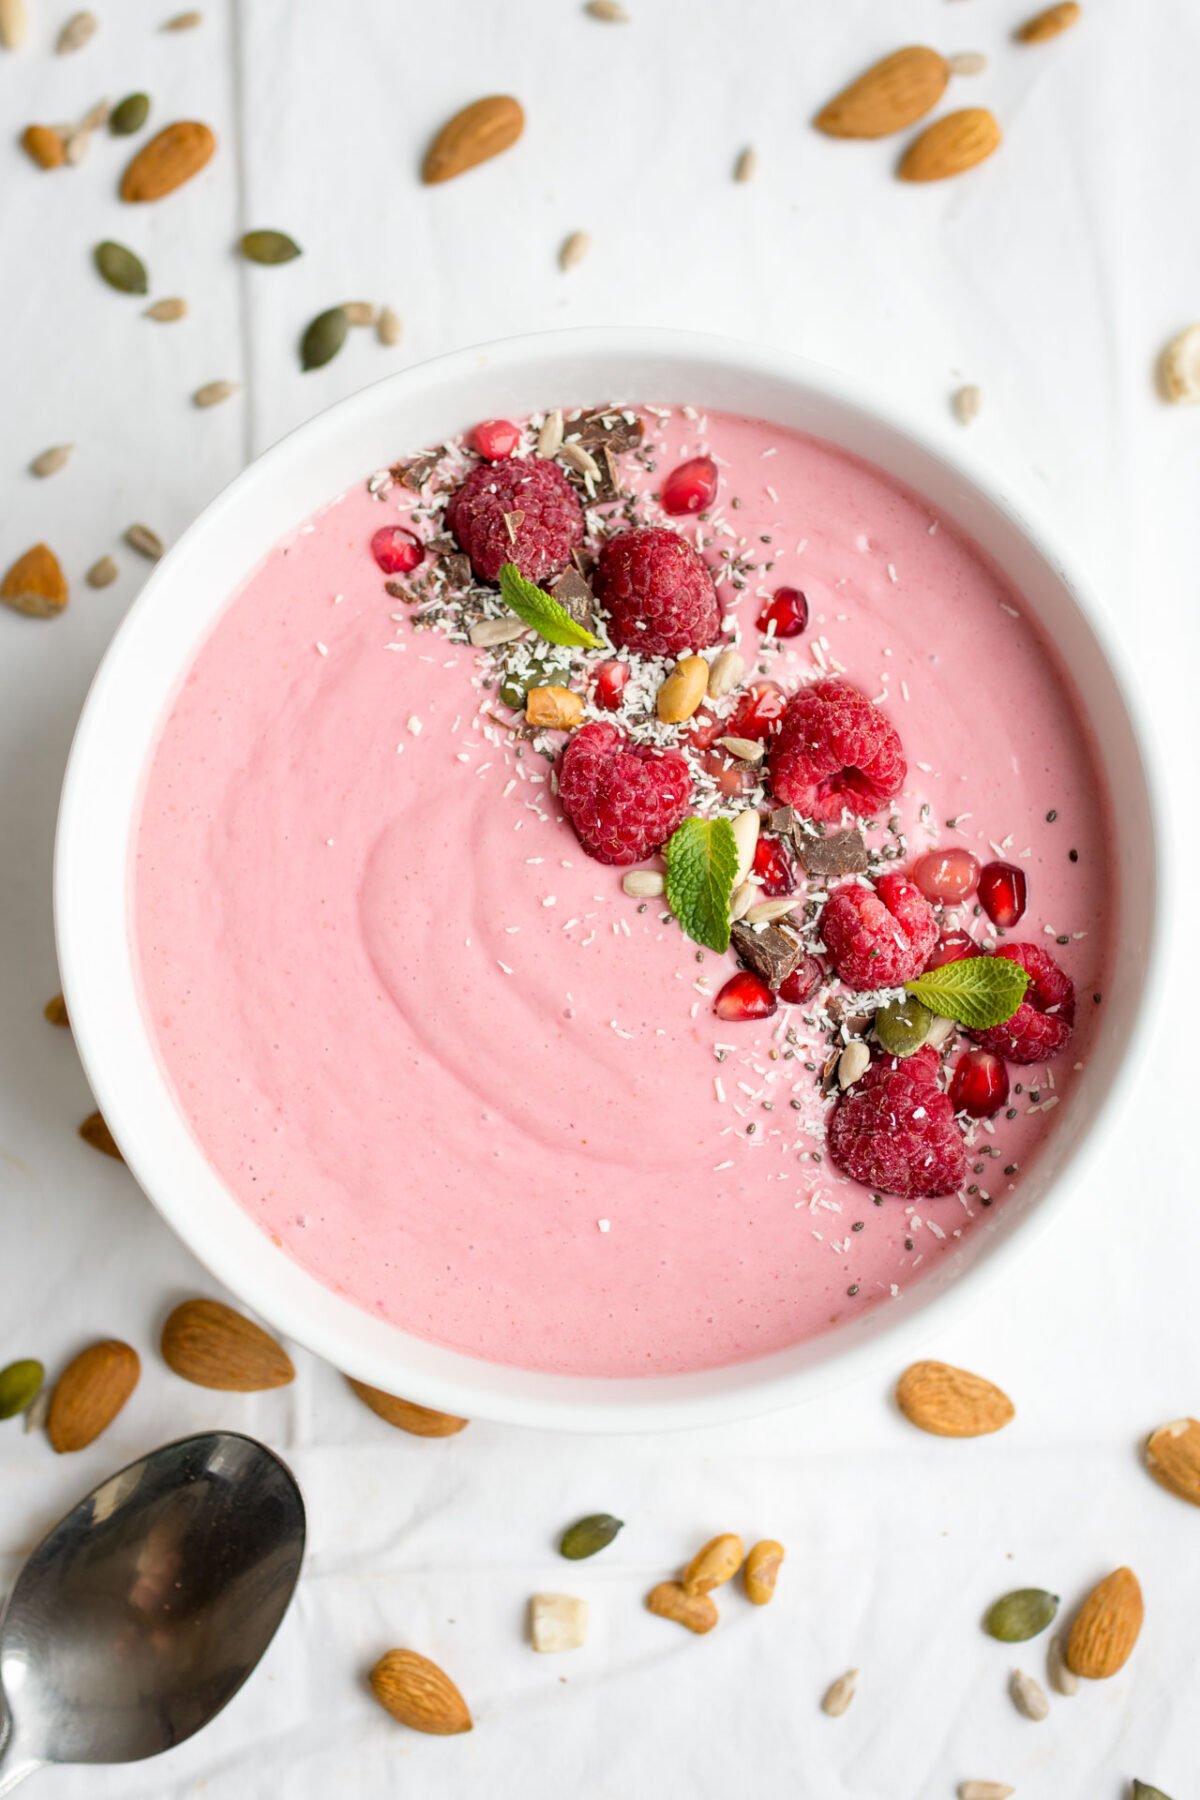 Smoothie Bowls are a fun way to get some fresh produce into your mornings! Start off with the same base and customise your bowls into one of my 3 recipes! Top them will all sorts of great ingredients and enjoy your colourful smoothie bowl in the morning!